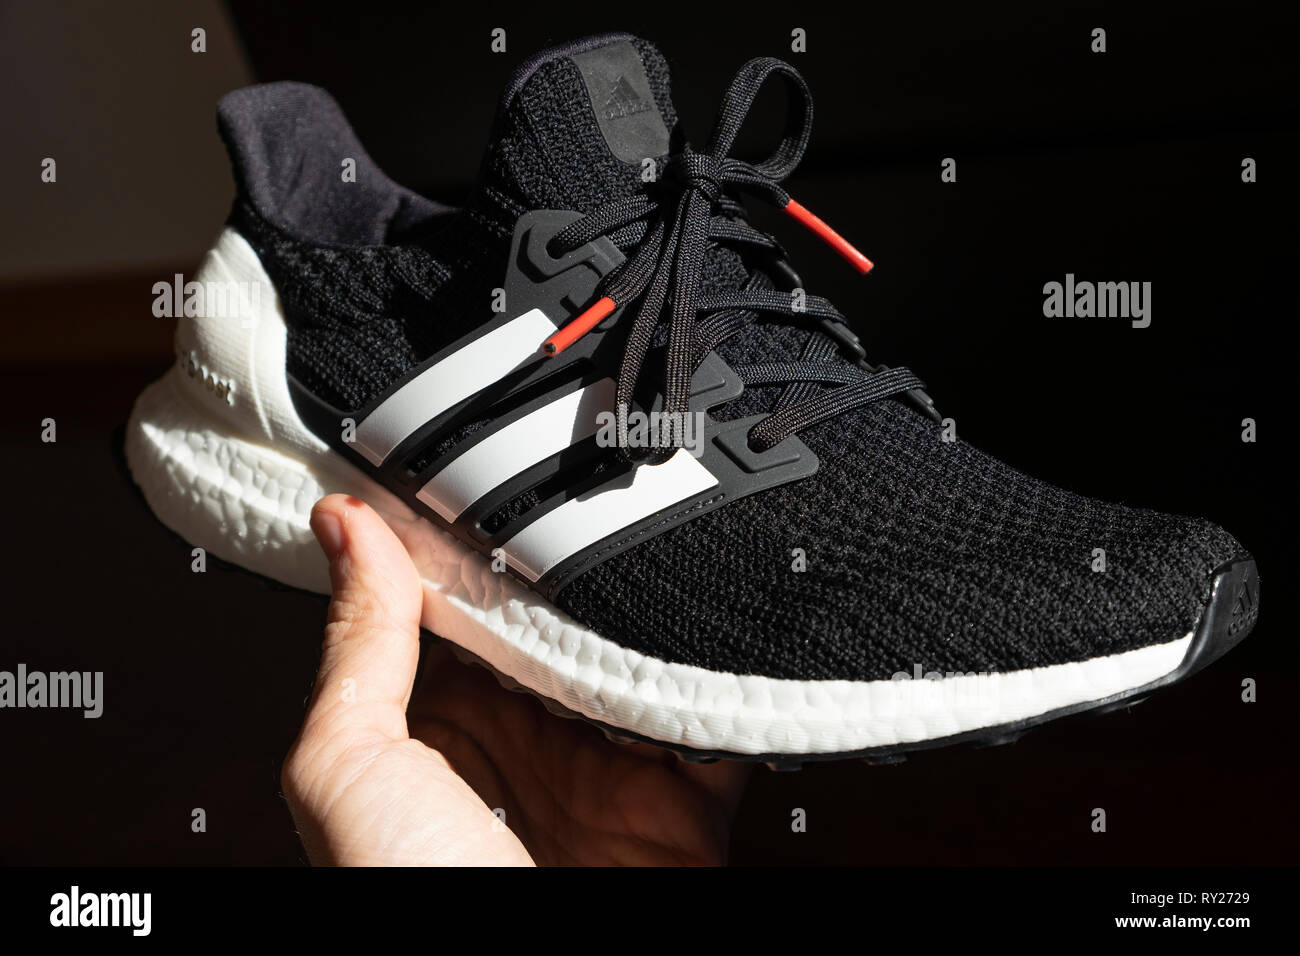 Person holding a black Adidas Ultraboost running shoe Stock Photo - Alamy